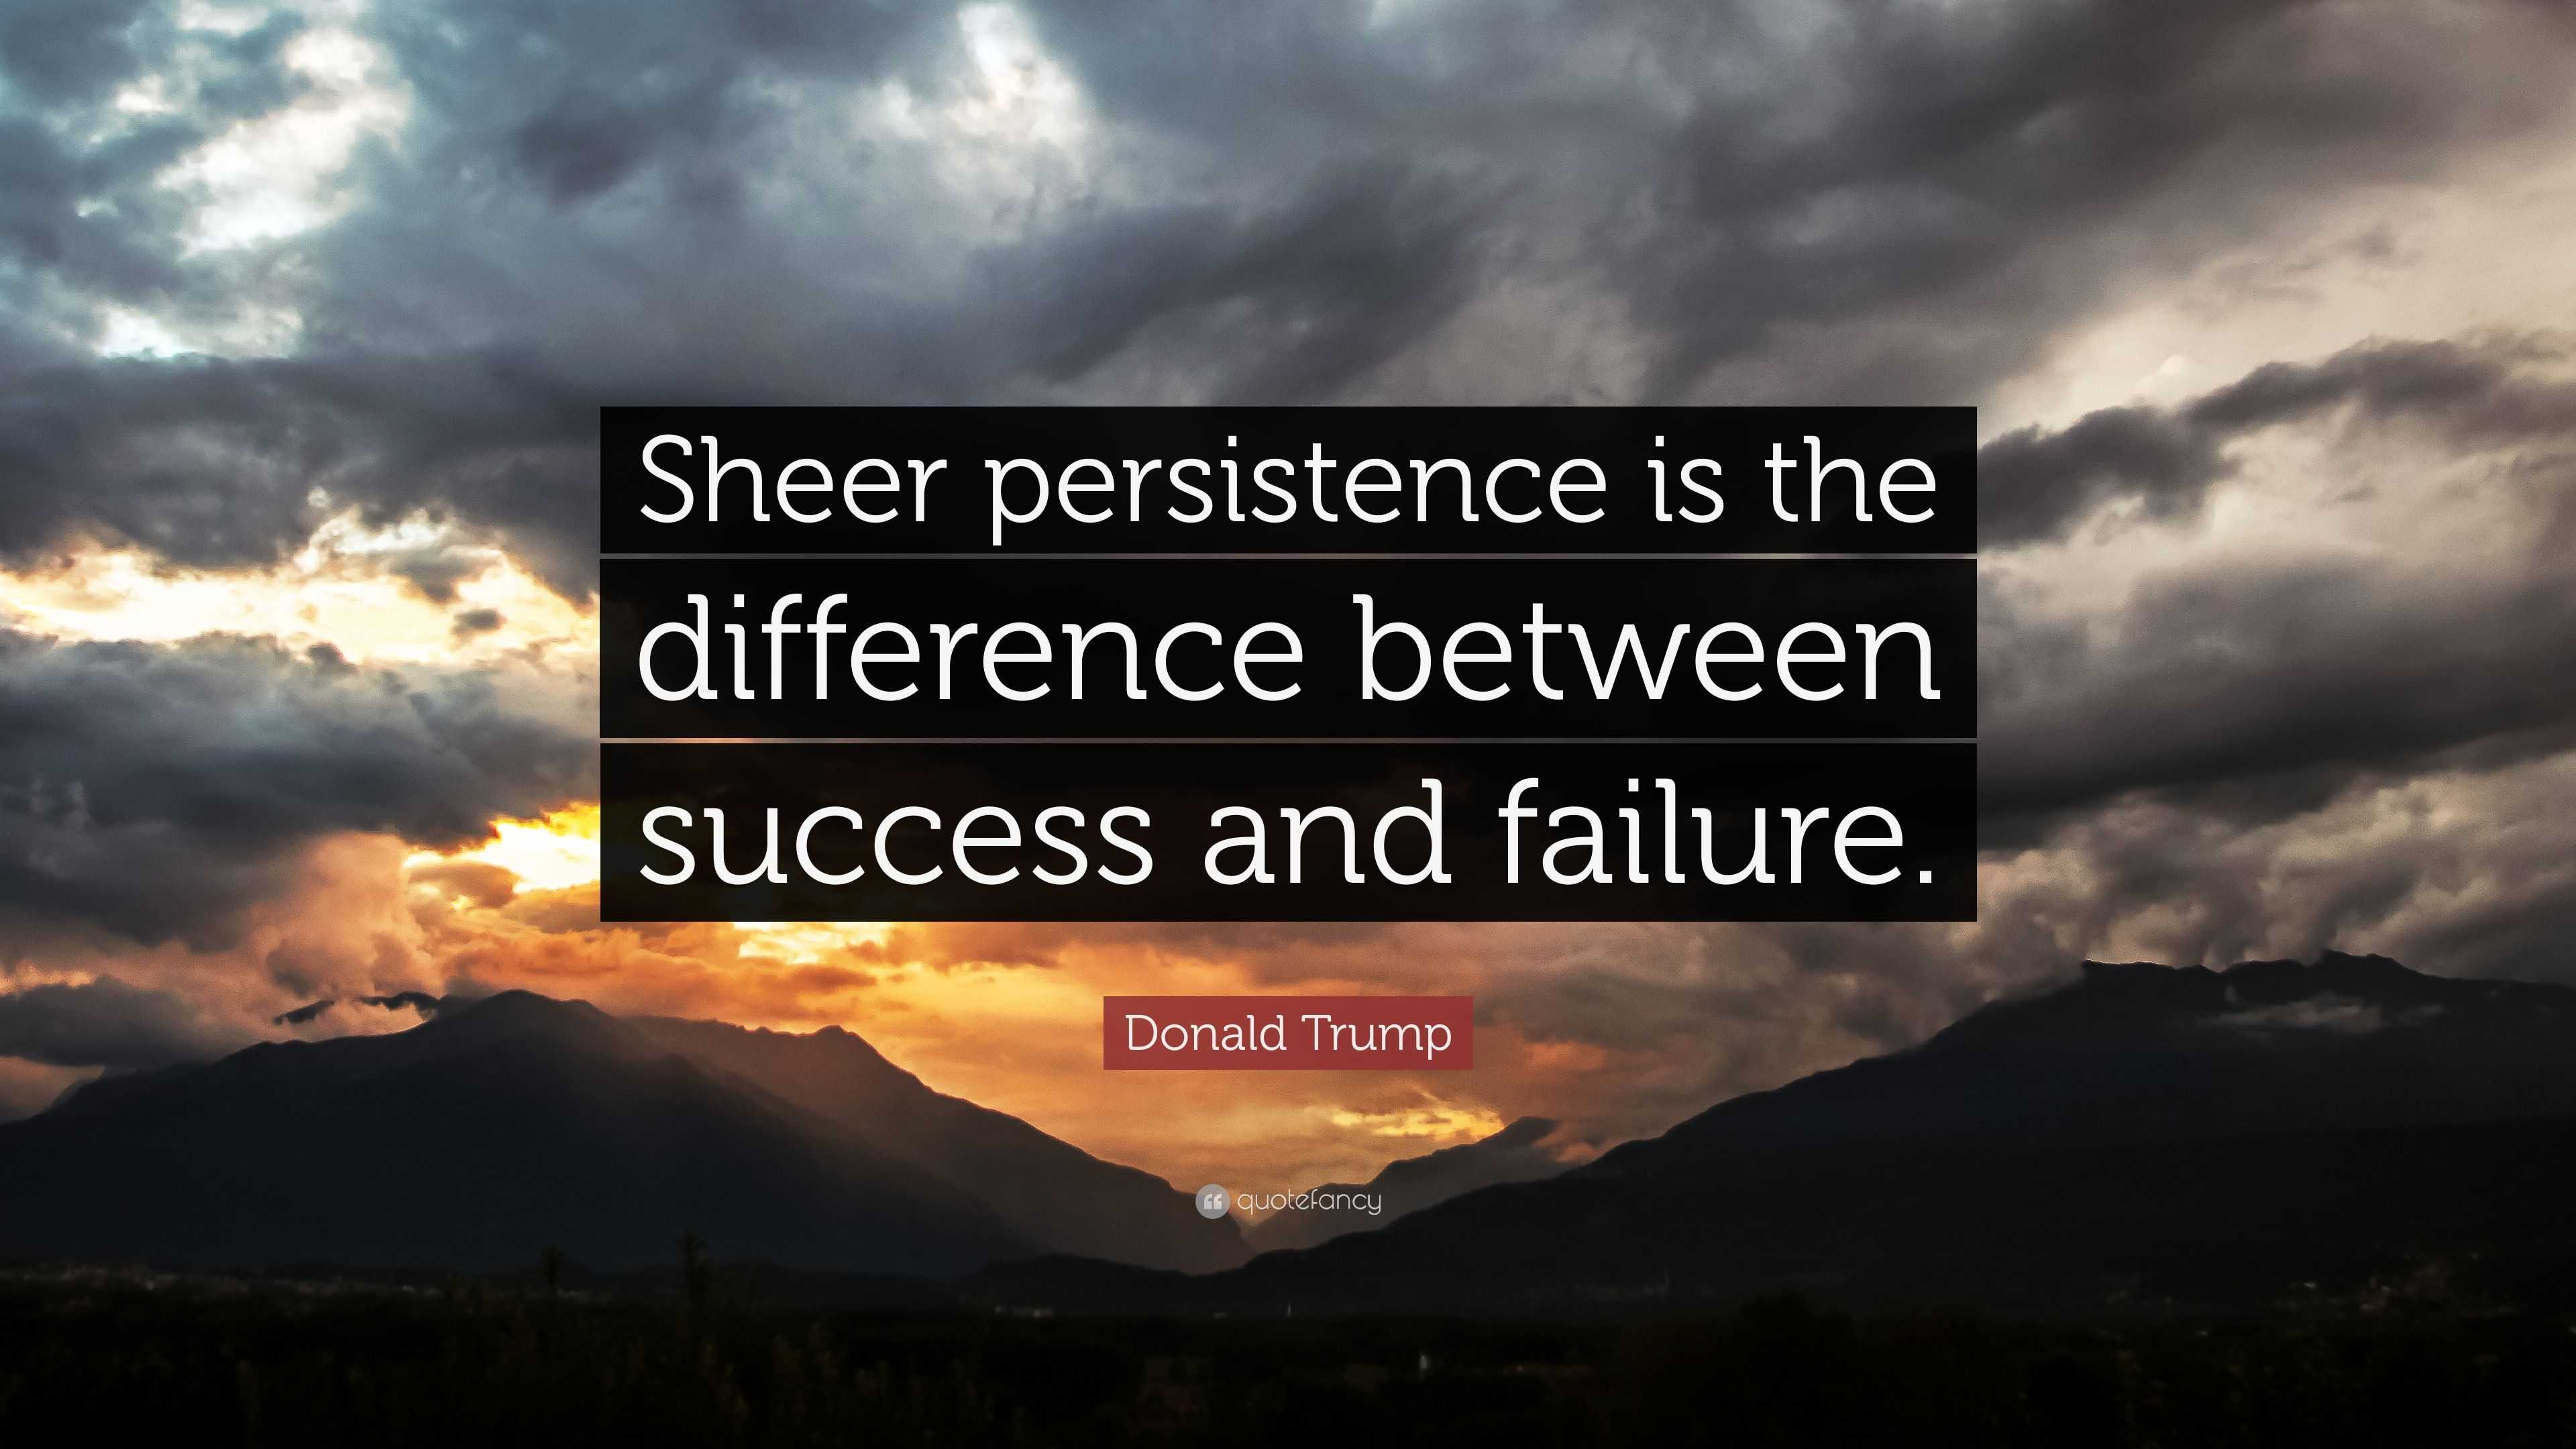 Donald Trump Quote: “Sheer persistence is the difference between